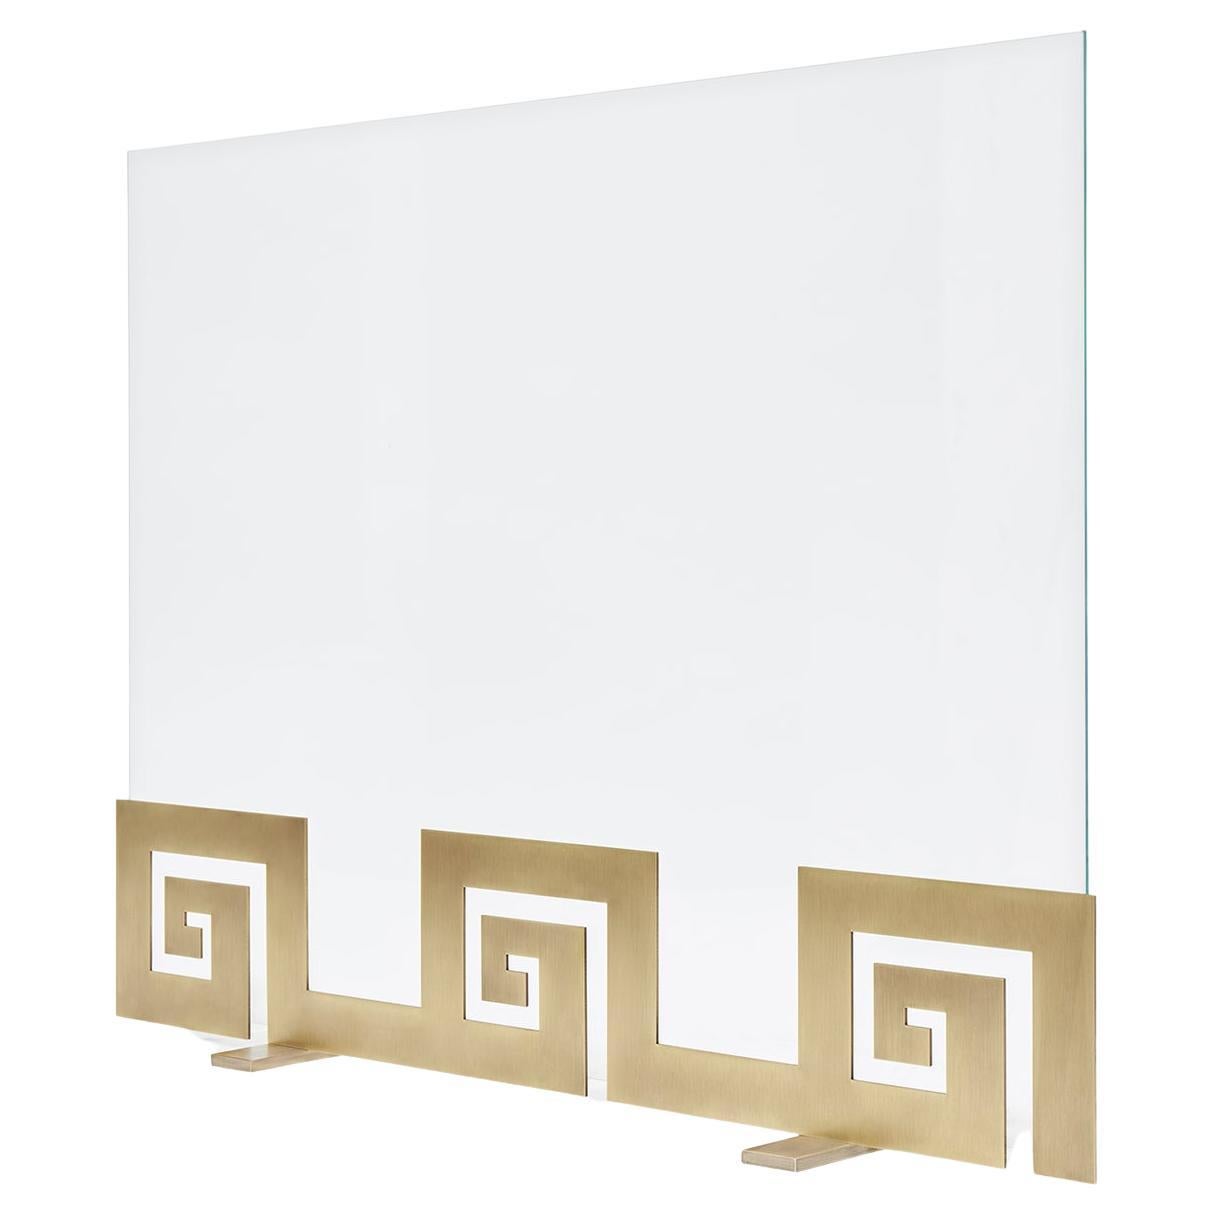 Contemporary Fireplace Screen "Apollo" in Brass and Fireproof Glass, by Anaktae